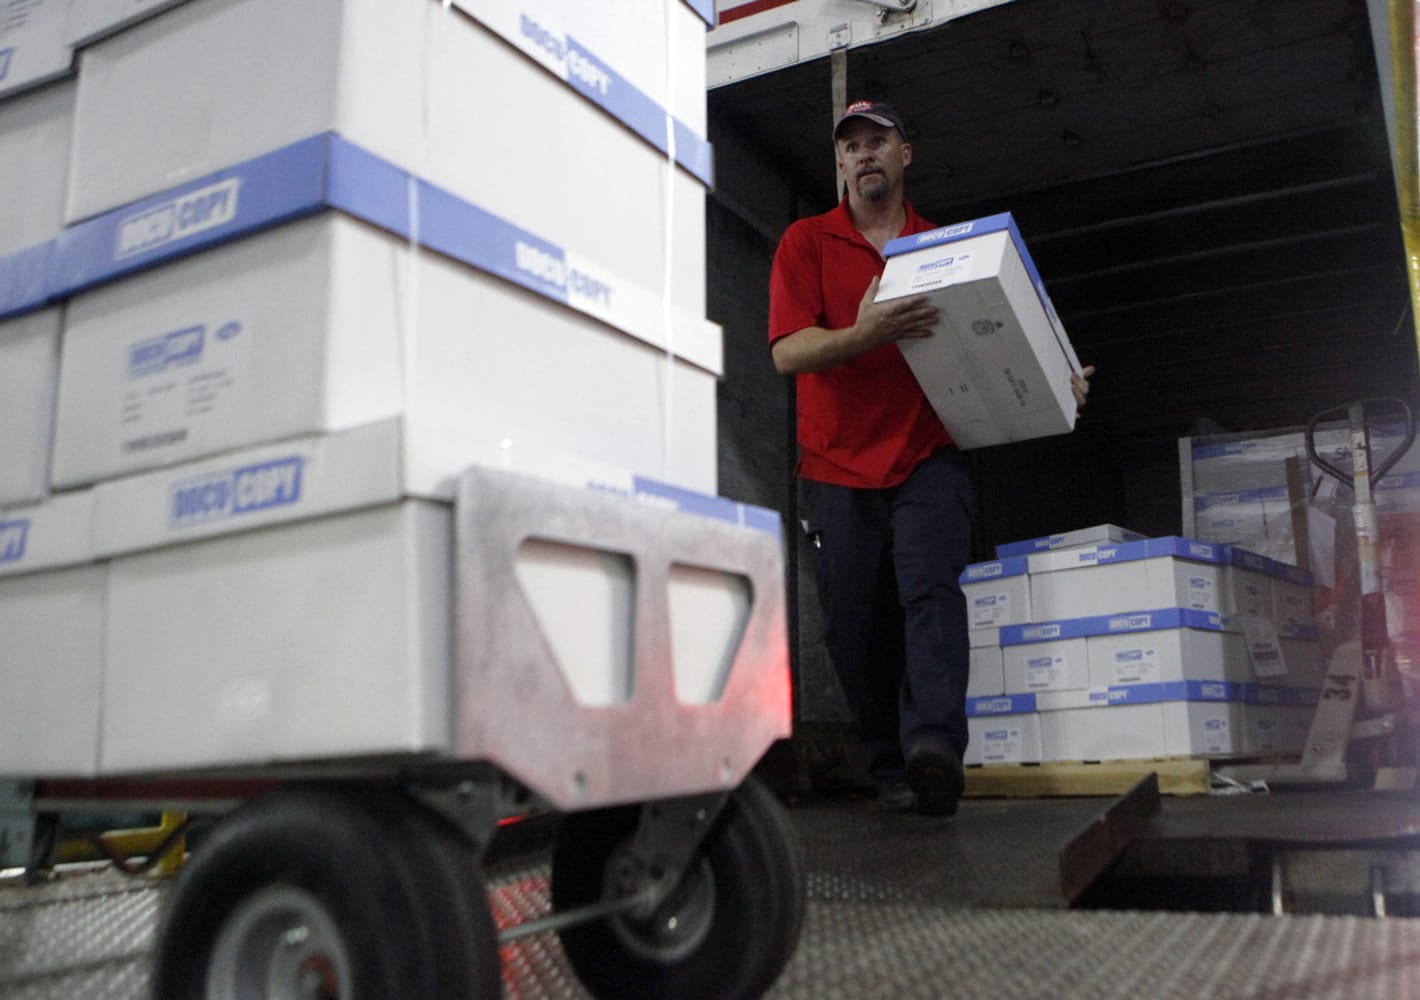 An SAIA employee unloads copy paper from a delivery truck Friday at Centennial Tower in downtown Atlanta.